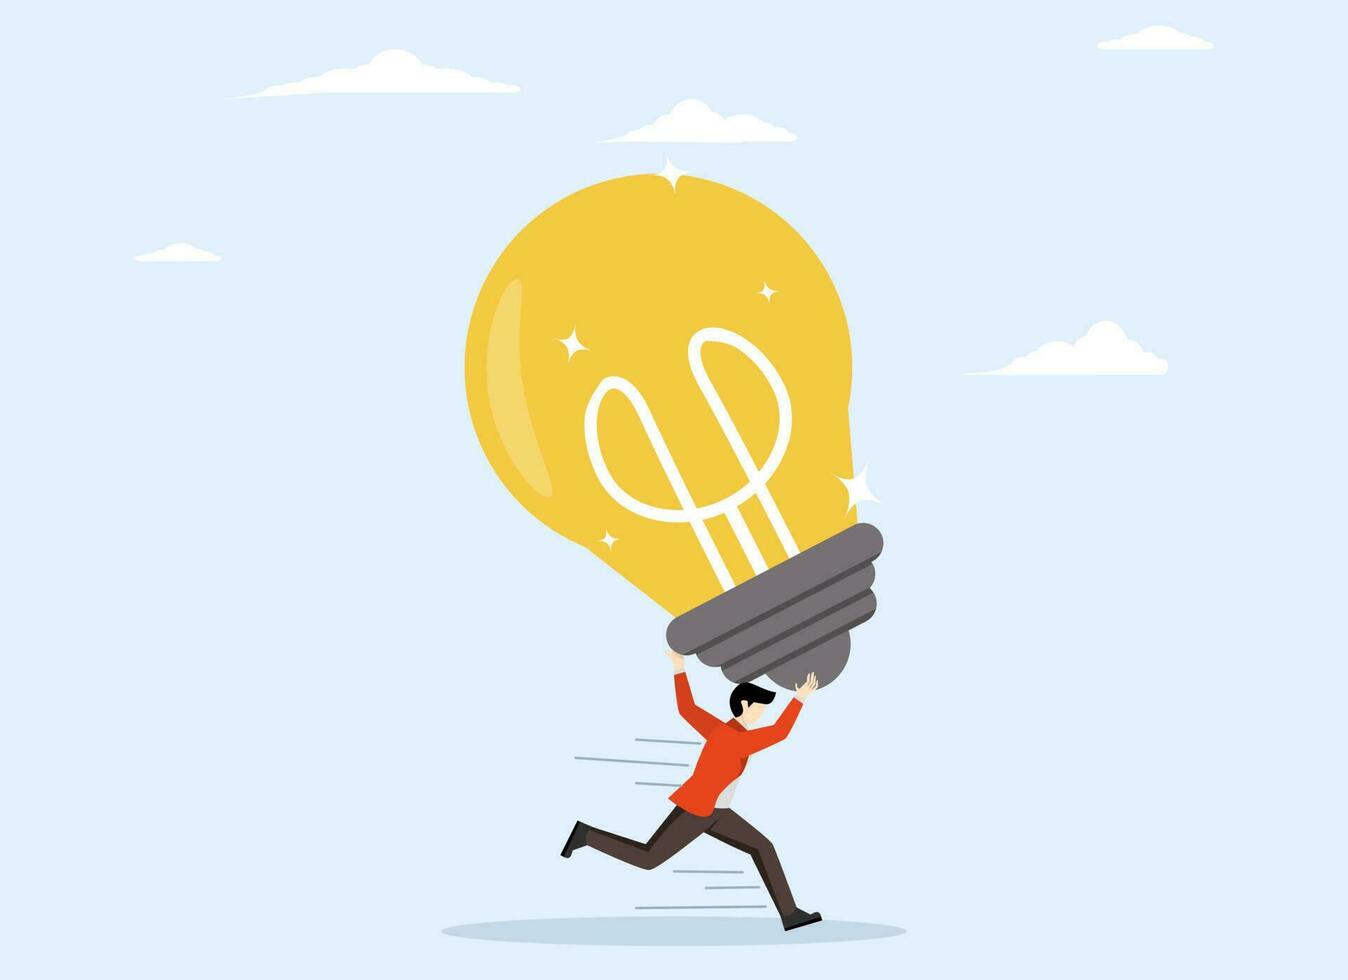 concept of finding a new idea, creativity and innovation to change or invent a new product, solution to solve a problem, excited entrepreneur carrying a big light bulb idea to find a new product. vector